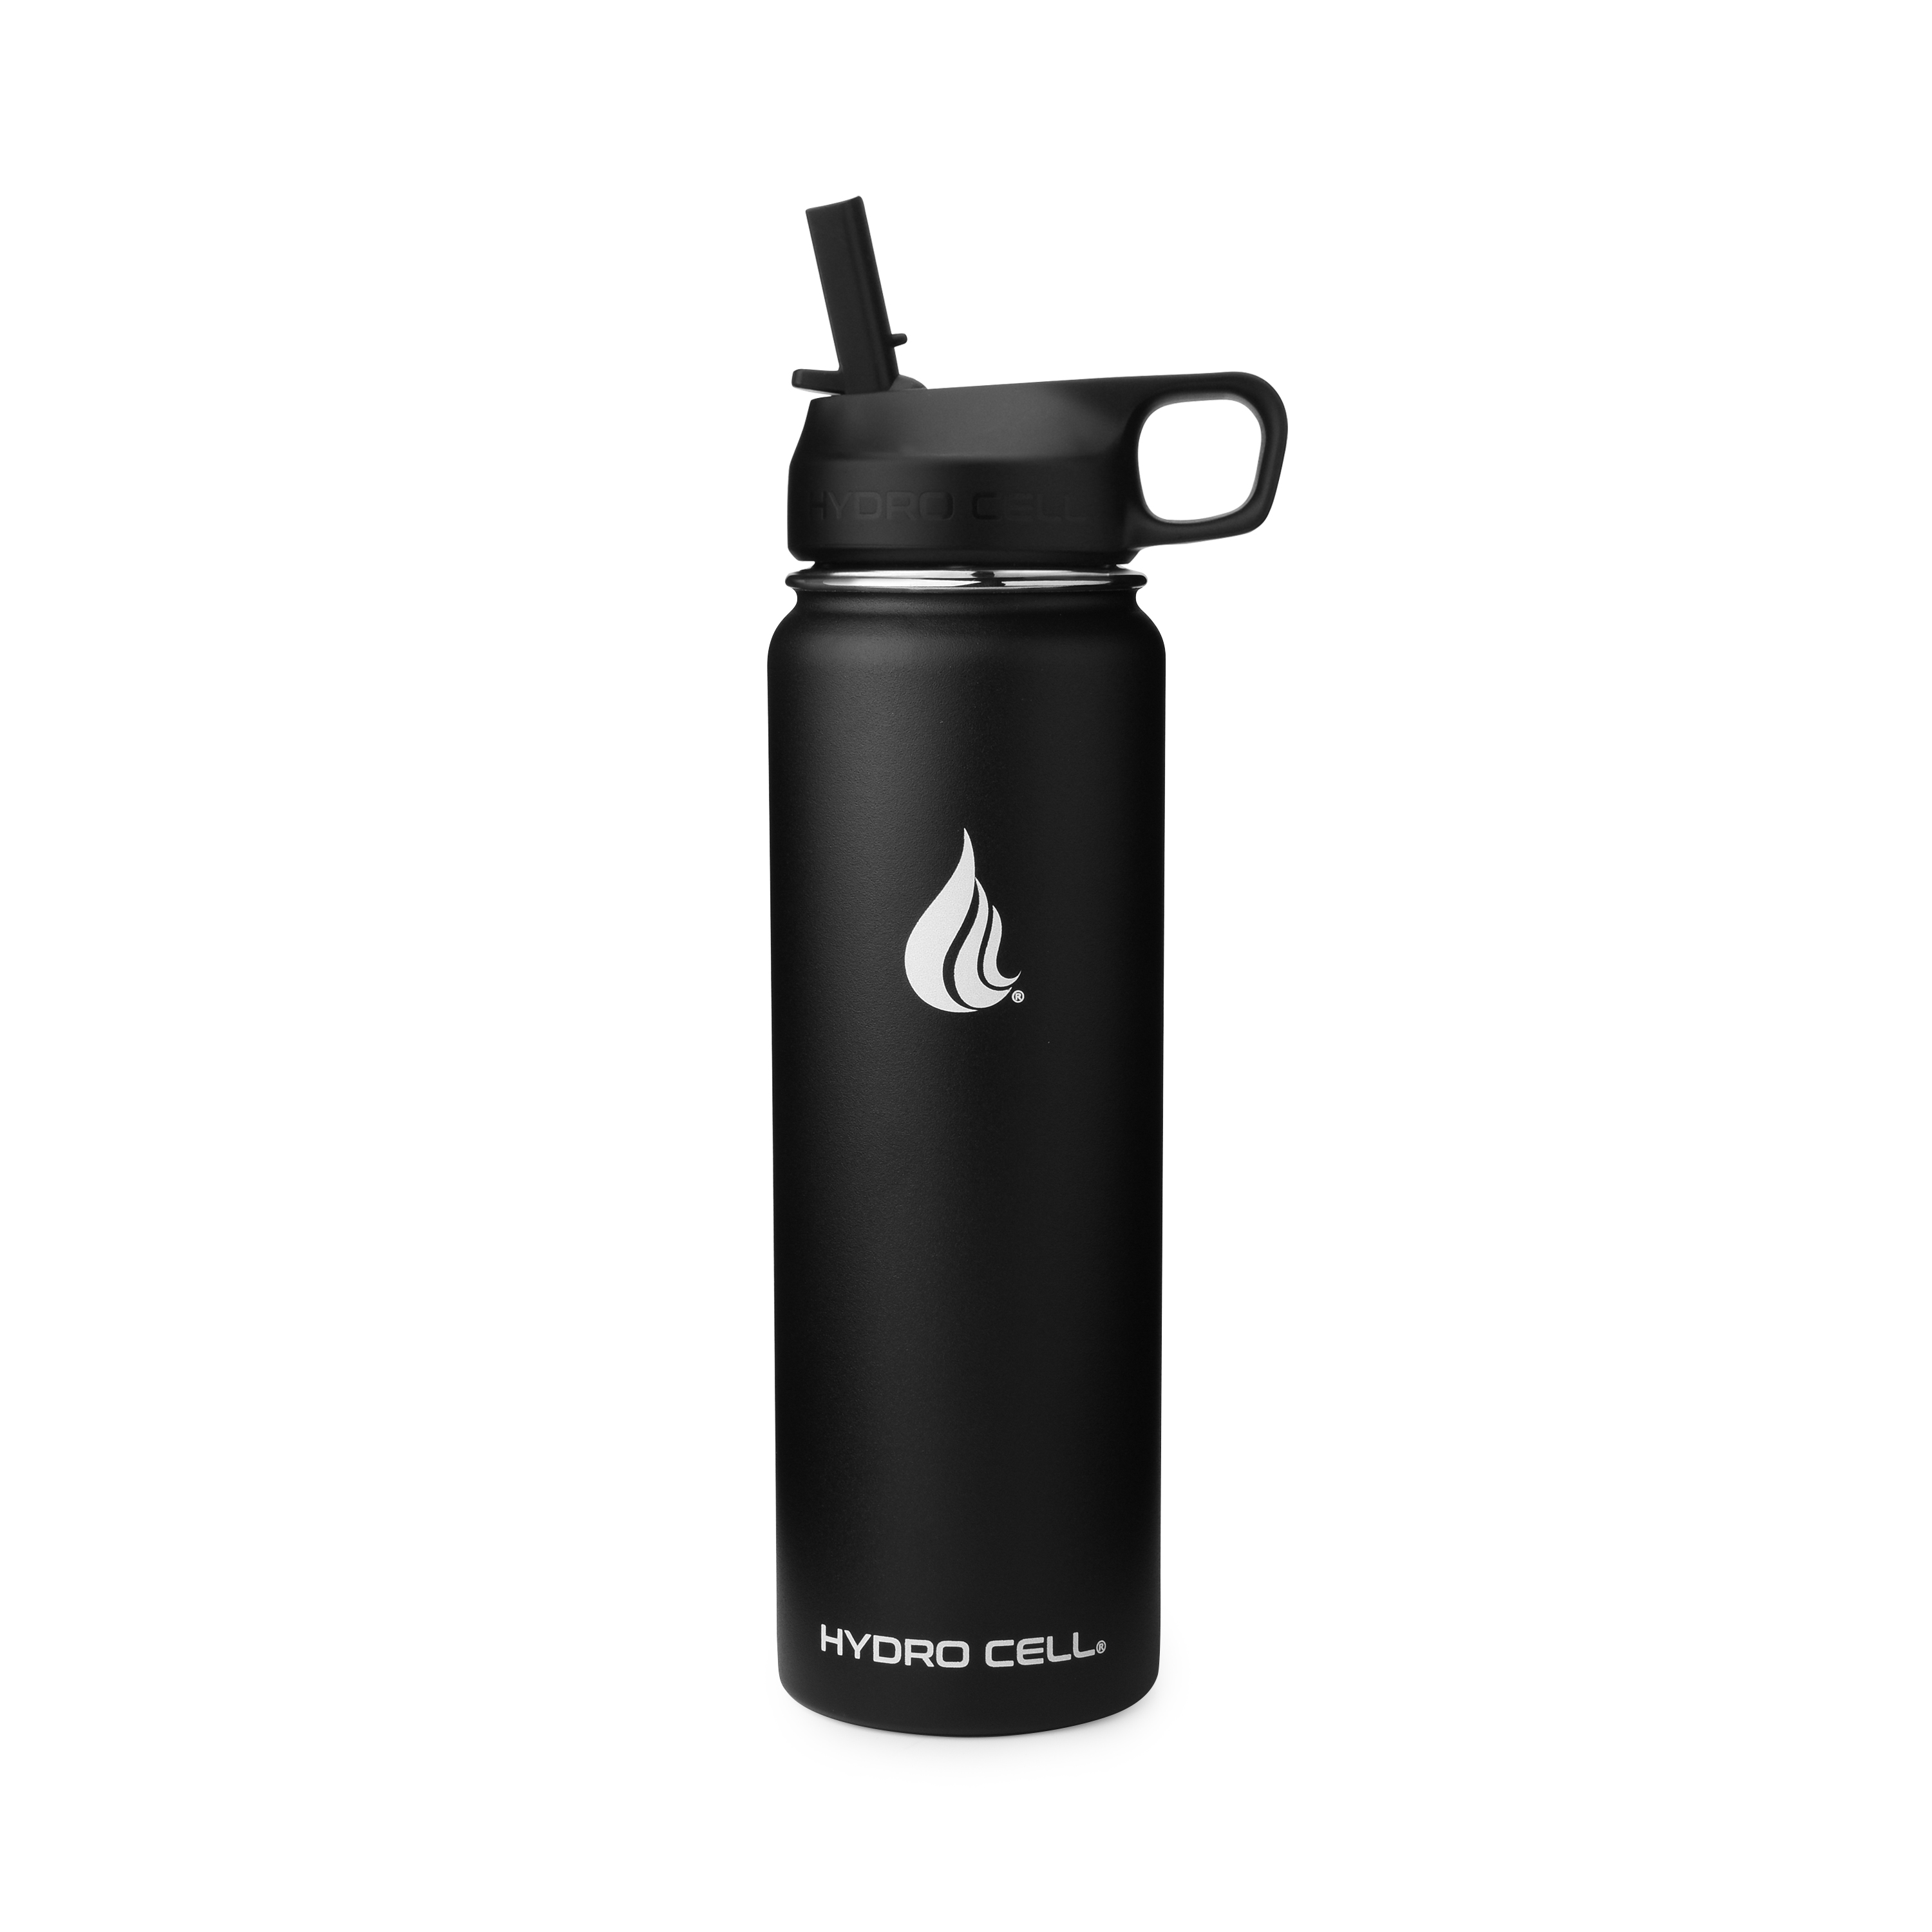 24oz (Fluid Ounces) Wide Mouth Hydro Cell Stainless Steel Water Bottle Black - image 2 of 4